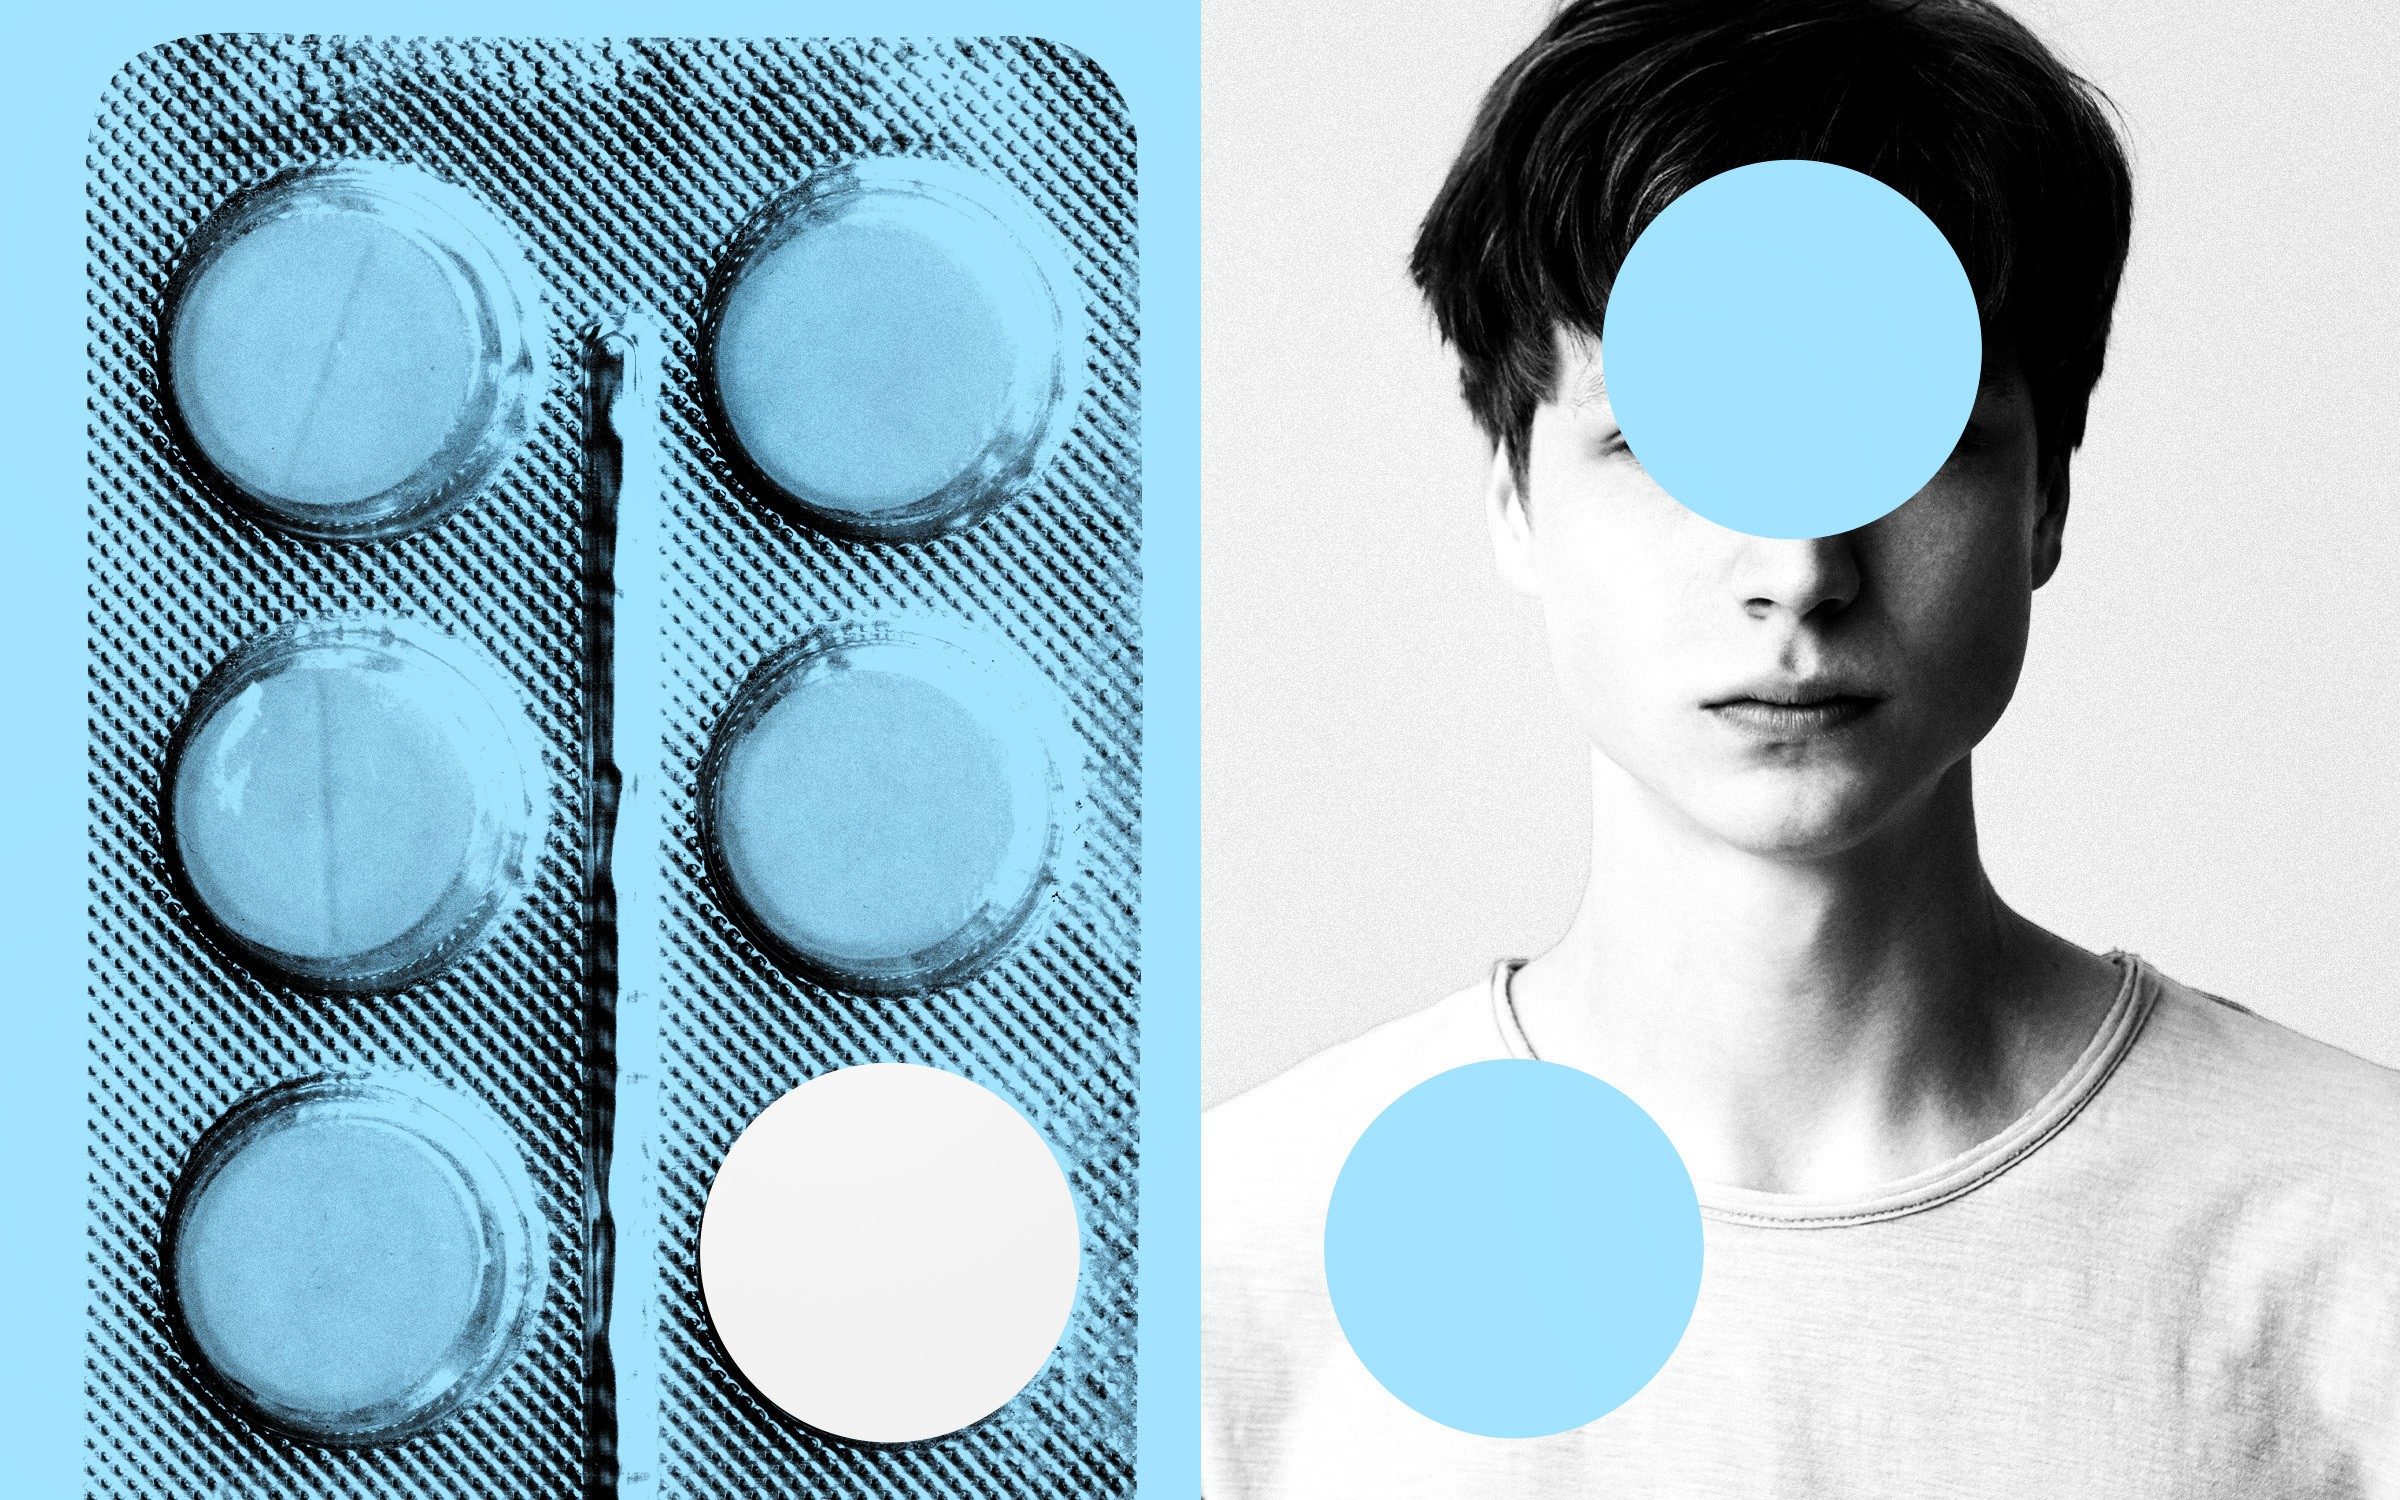 how the dutch experiment with puberty blockers turned toxic